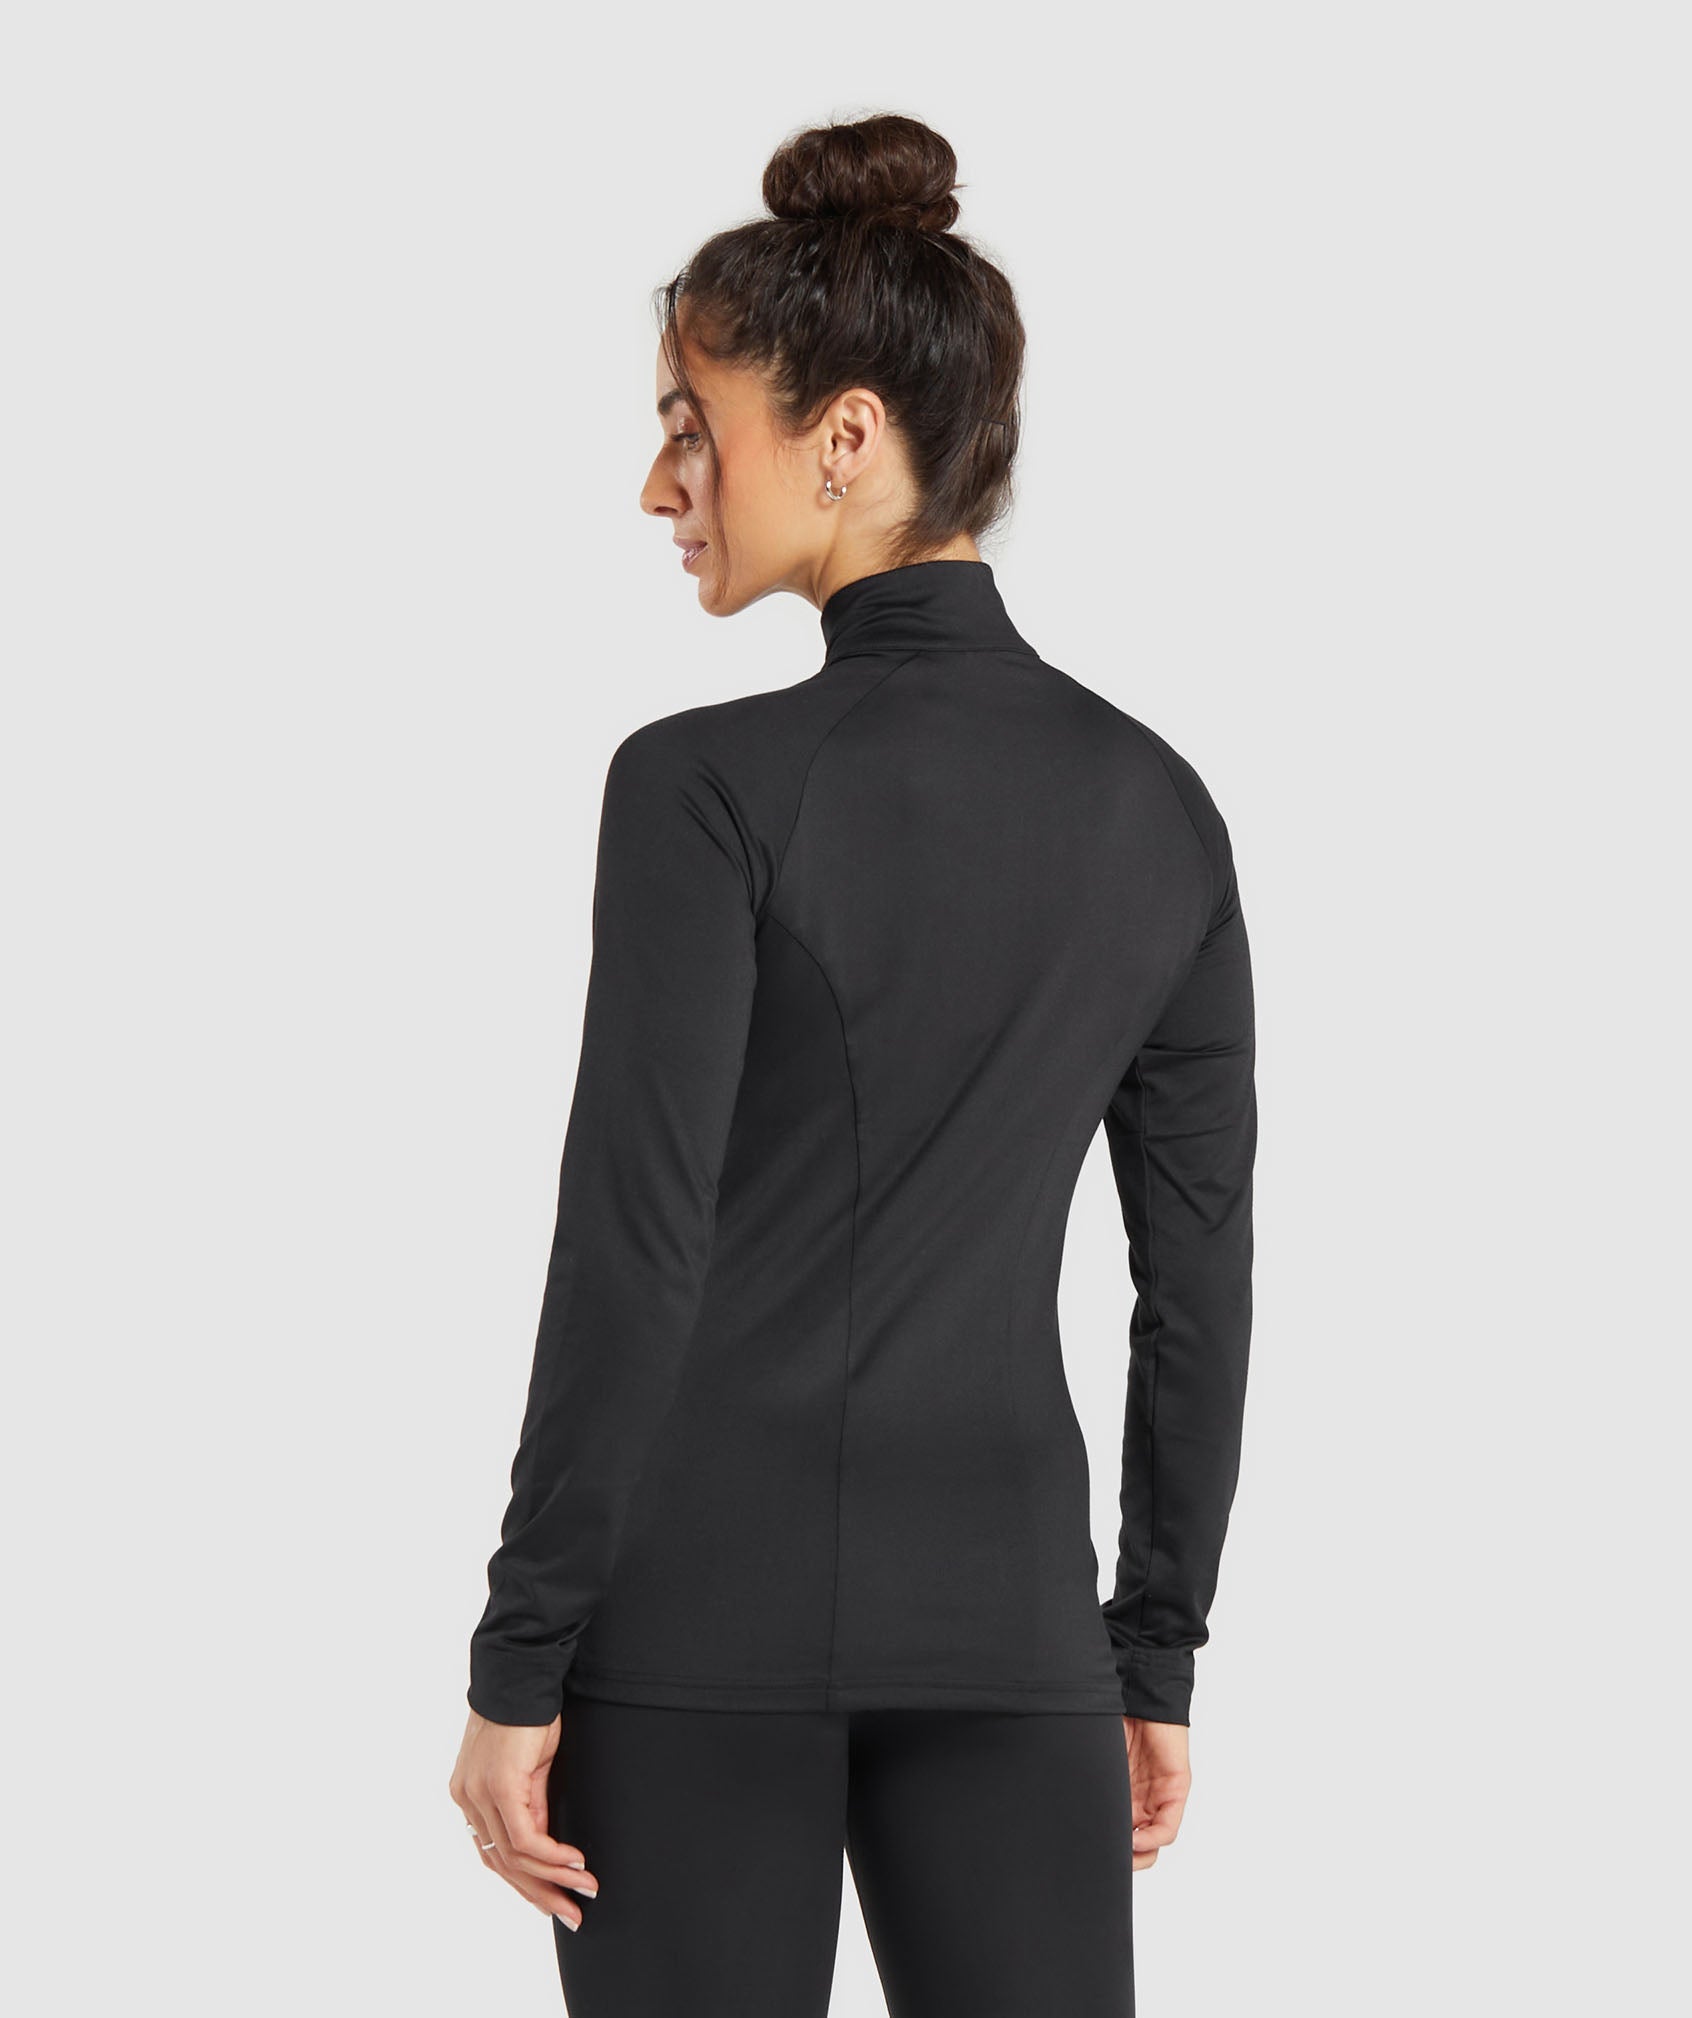 Training Jacket in Black - view 2